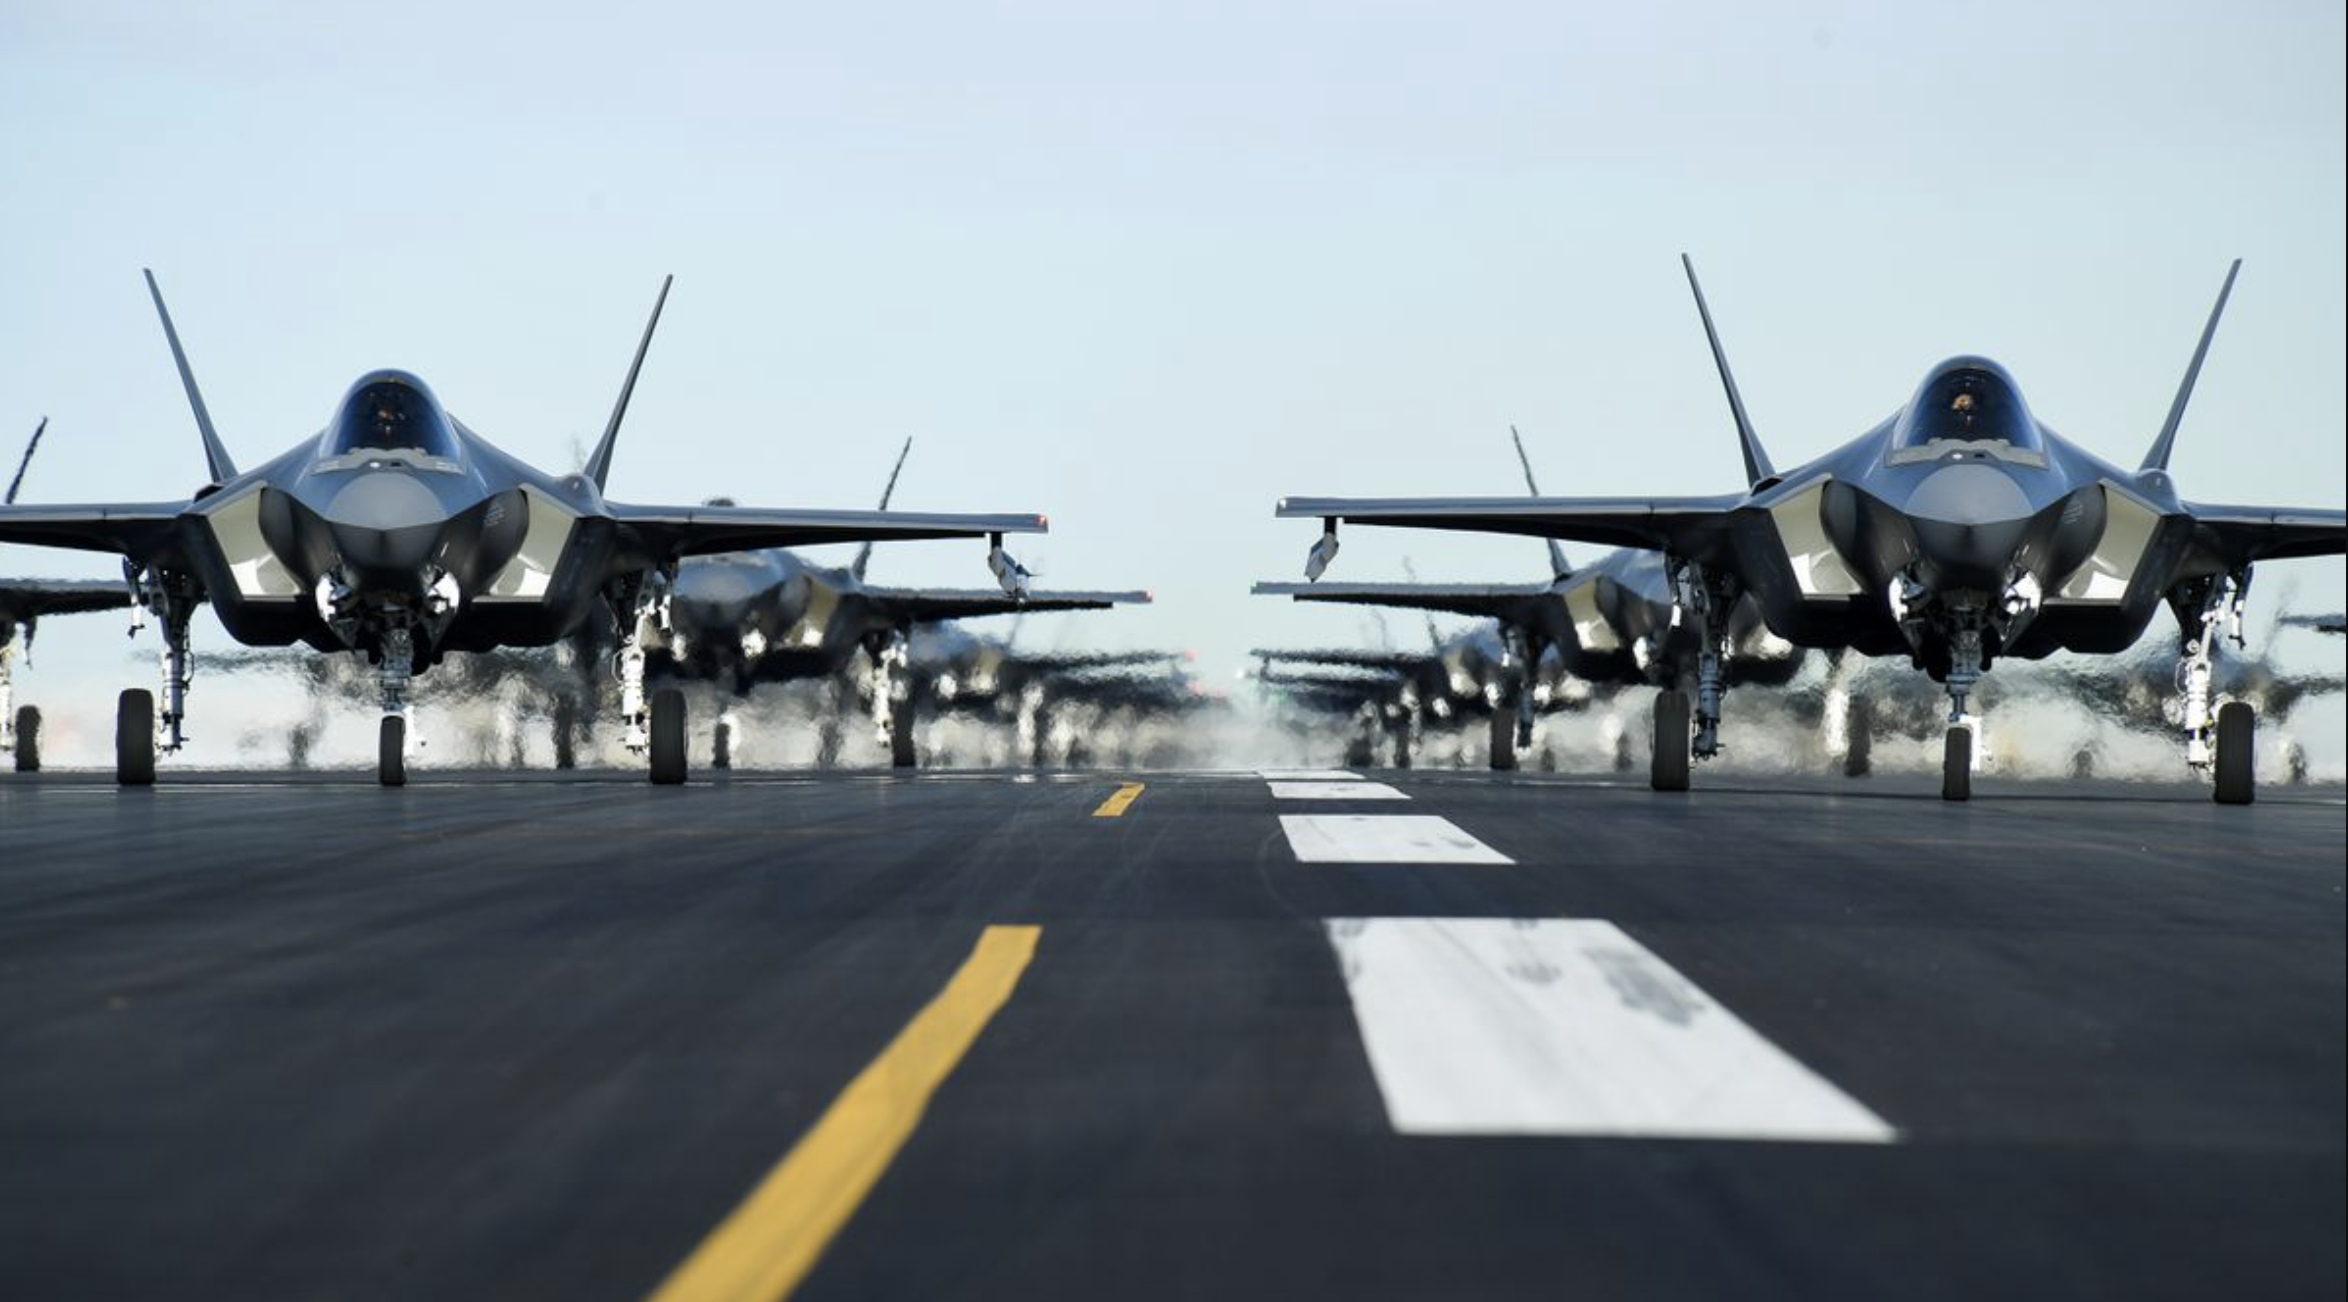 U.S. Air Force F-35A aircraft, from the 388th and 428th Fighter Wings, form up in an "elephant walk" during an exercise at Hill Air Force Base, Utah